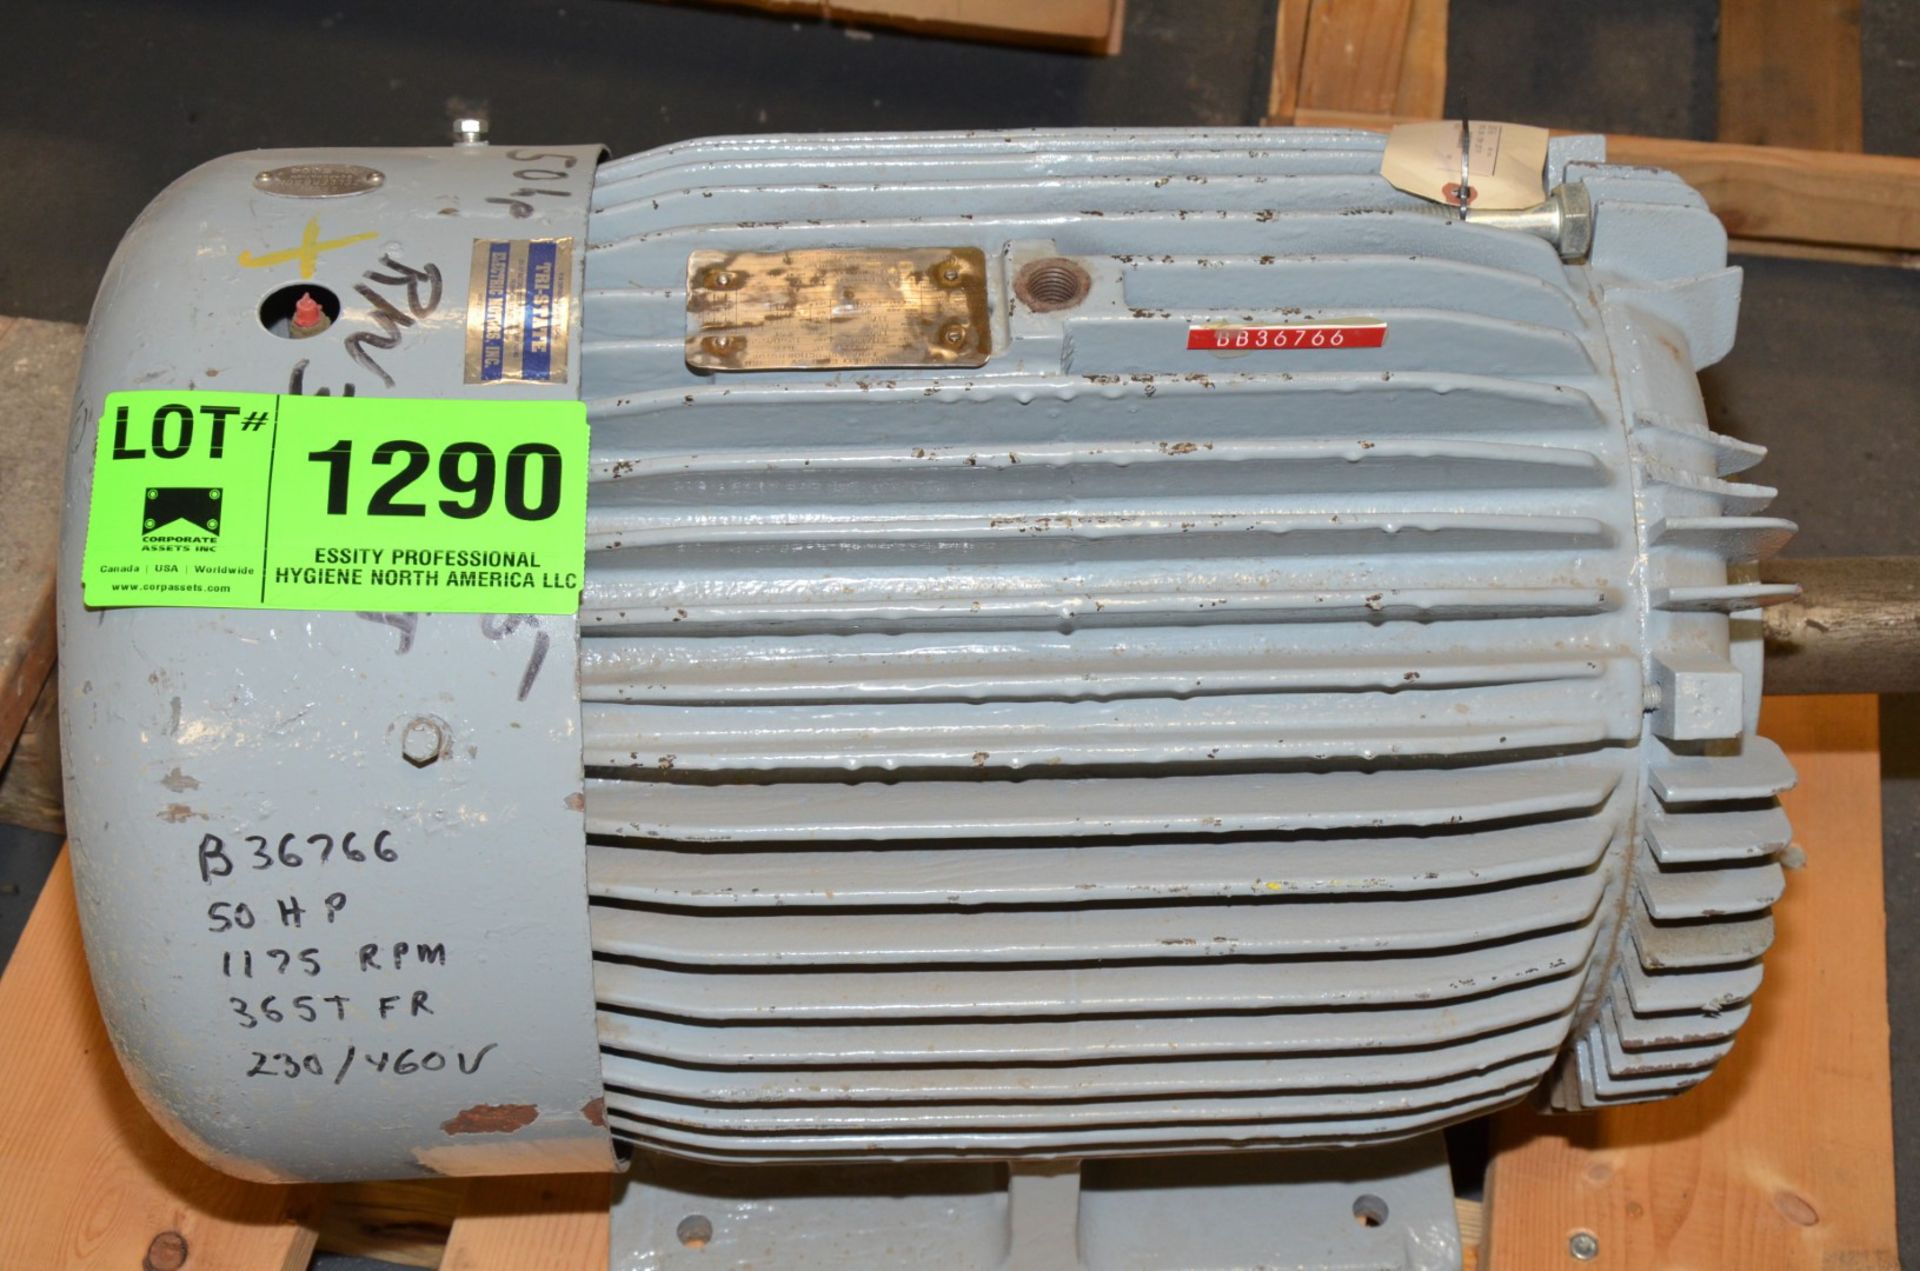 TOSHIBA 50 HP 1175 RPM 460V ELECTRIC MOTOR [RIGGING FEE FOR LOT #1290 - $25 USD PLUS APPLICABLE